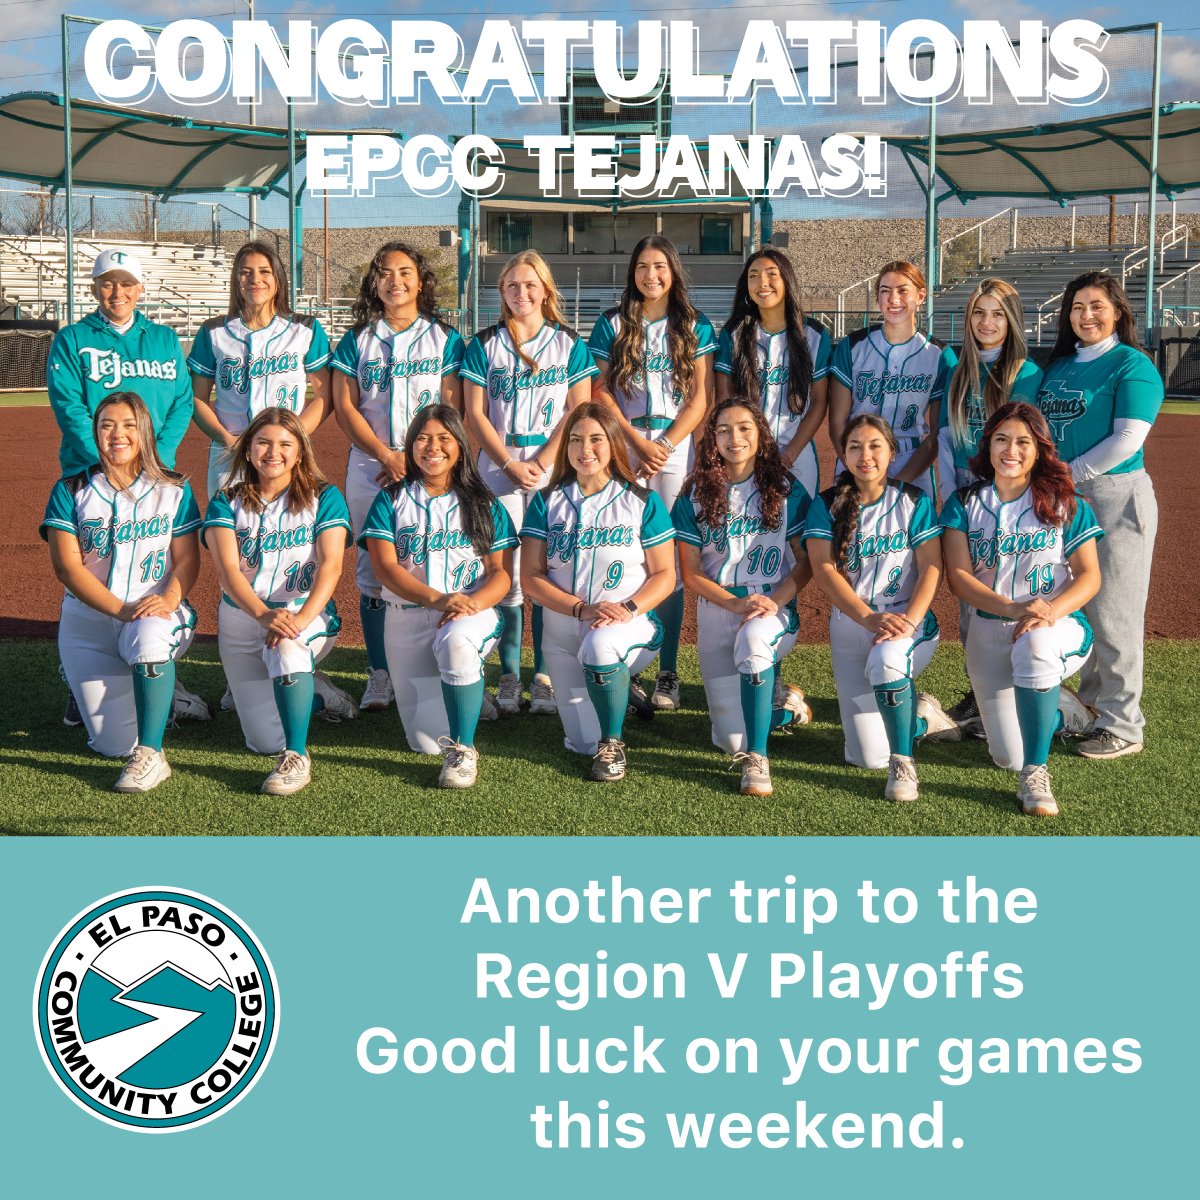 Congratulations Tejanas! Watch their playoff game Thursday, May 9, 2:00p.m. at TSBNSPORTS.com. #EPCCpride